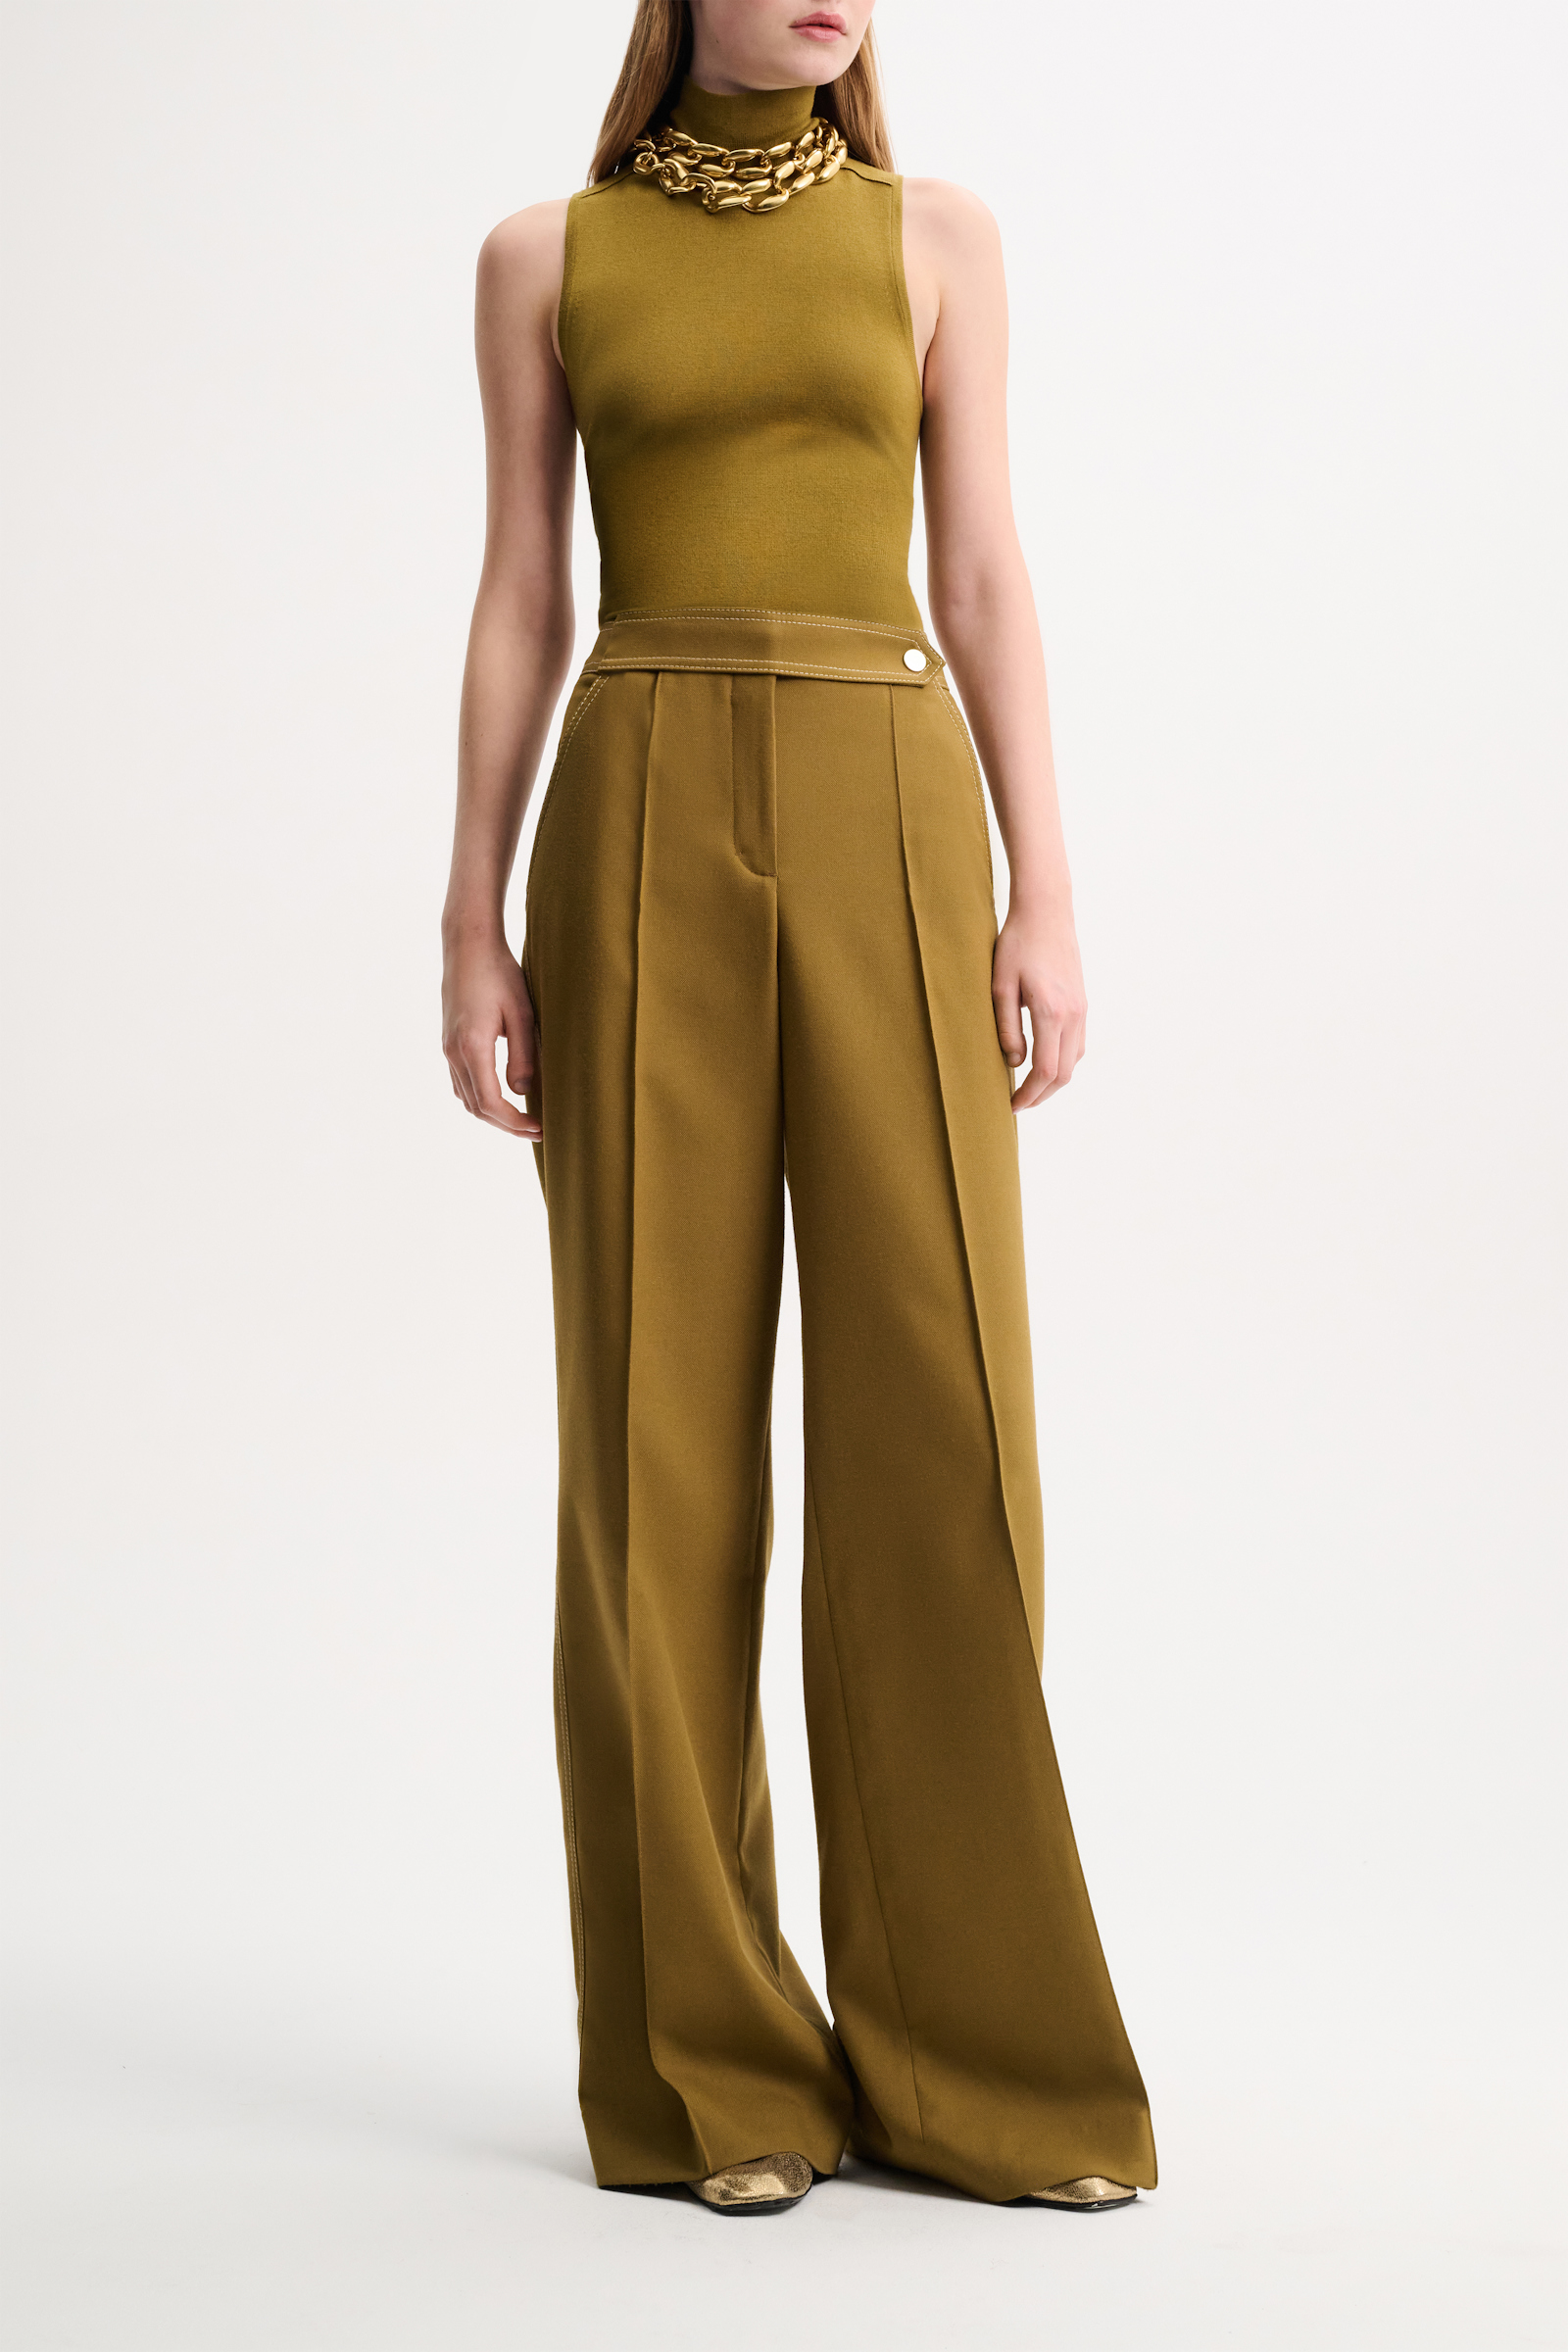 Dorothee Schumacher Straight leg pants with decorative stitching olive green